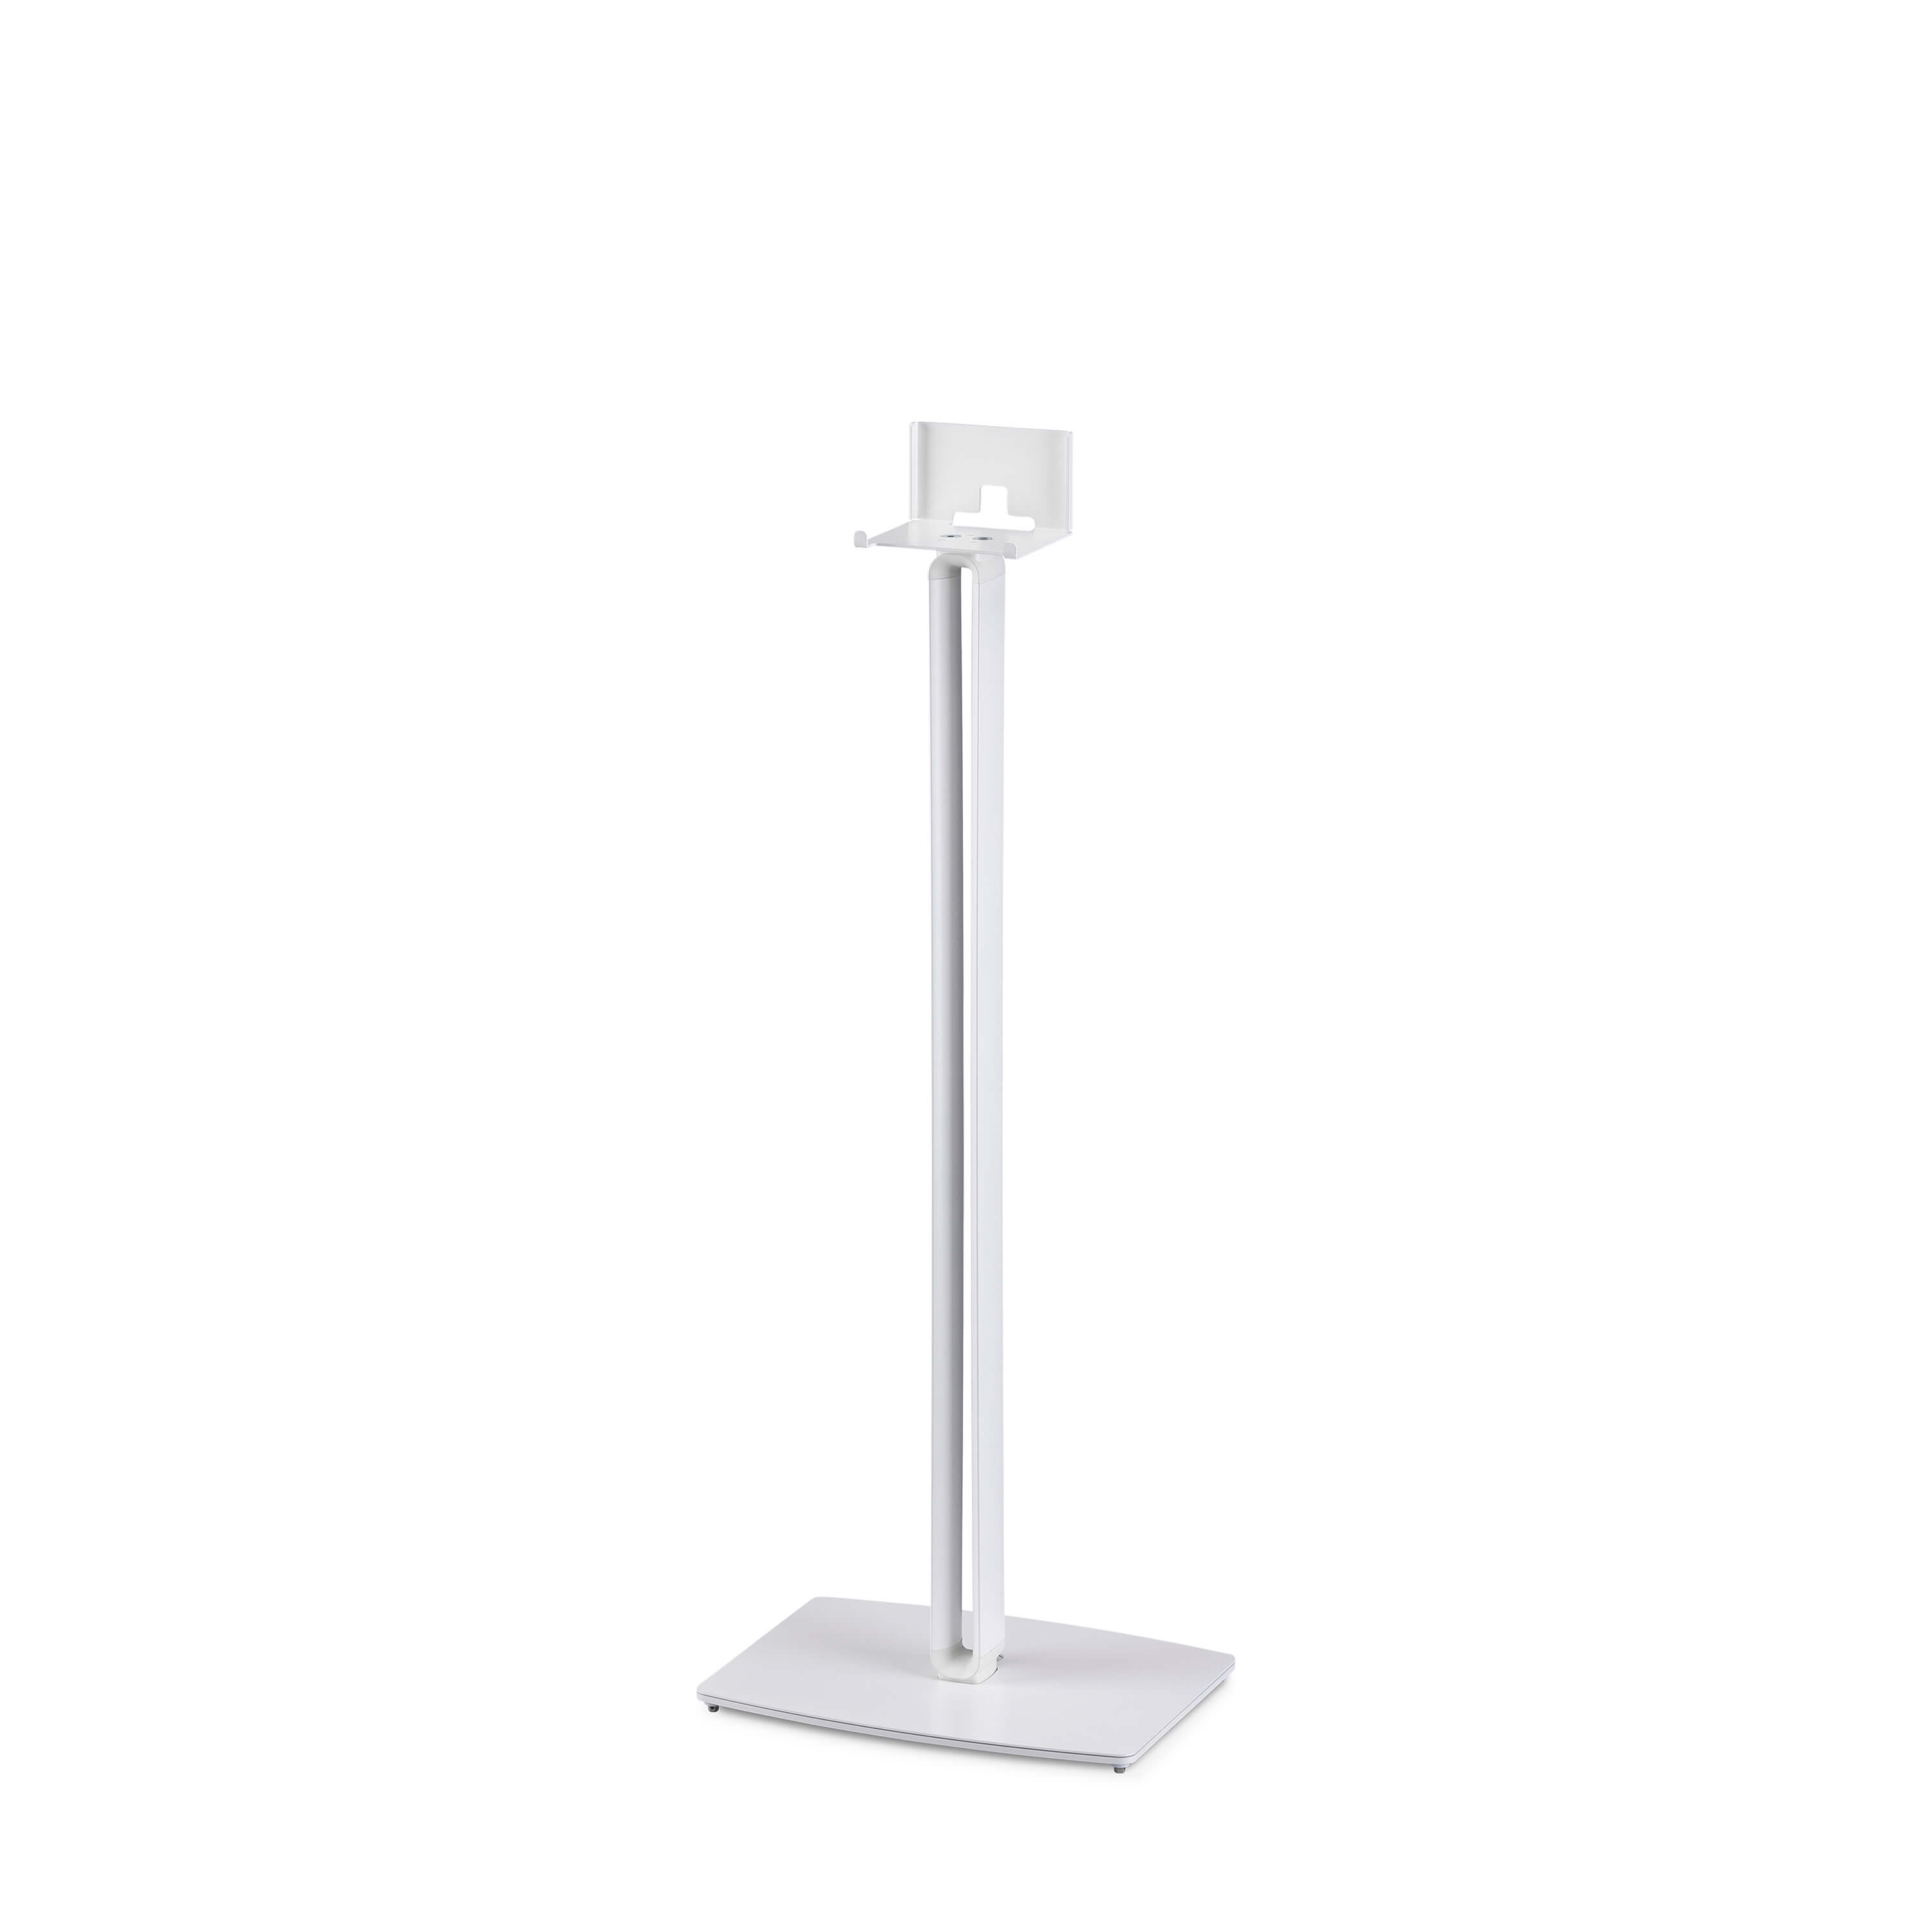 SoundXtra BOSE SOUNDTOUCH 10 Floor Stand white Singel